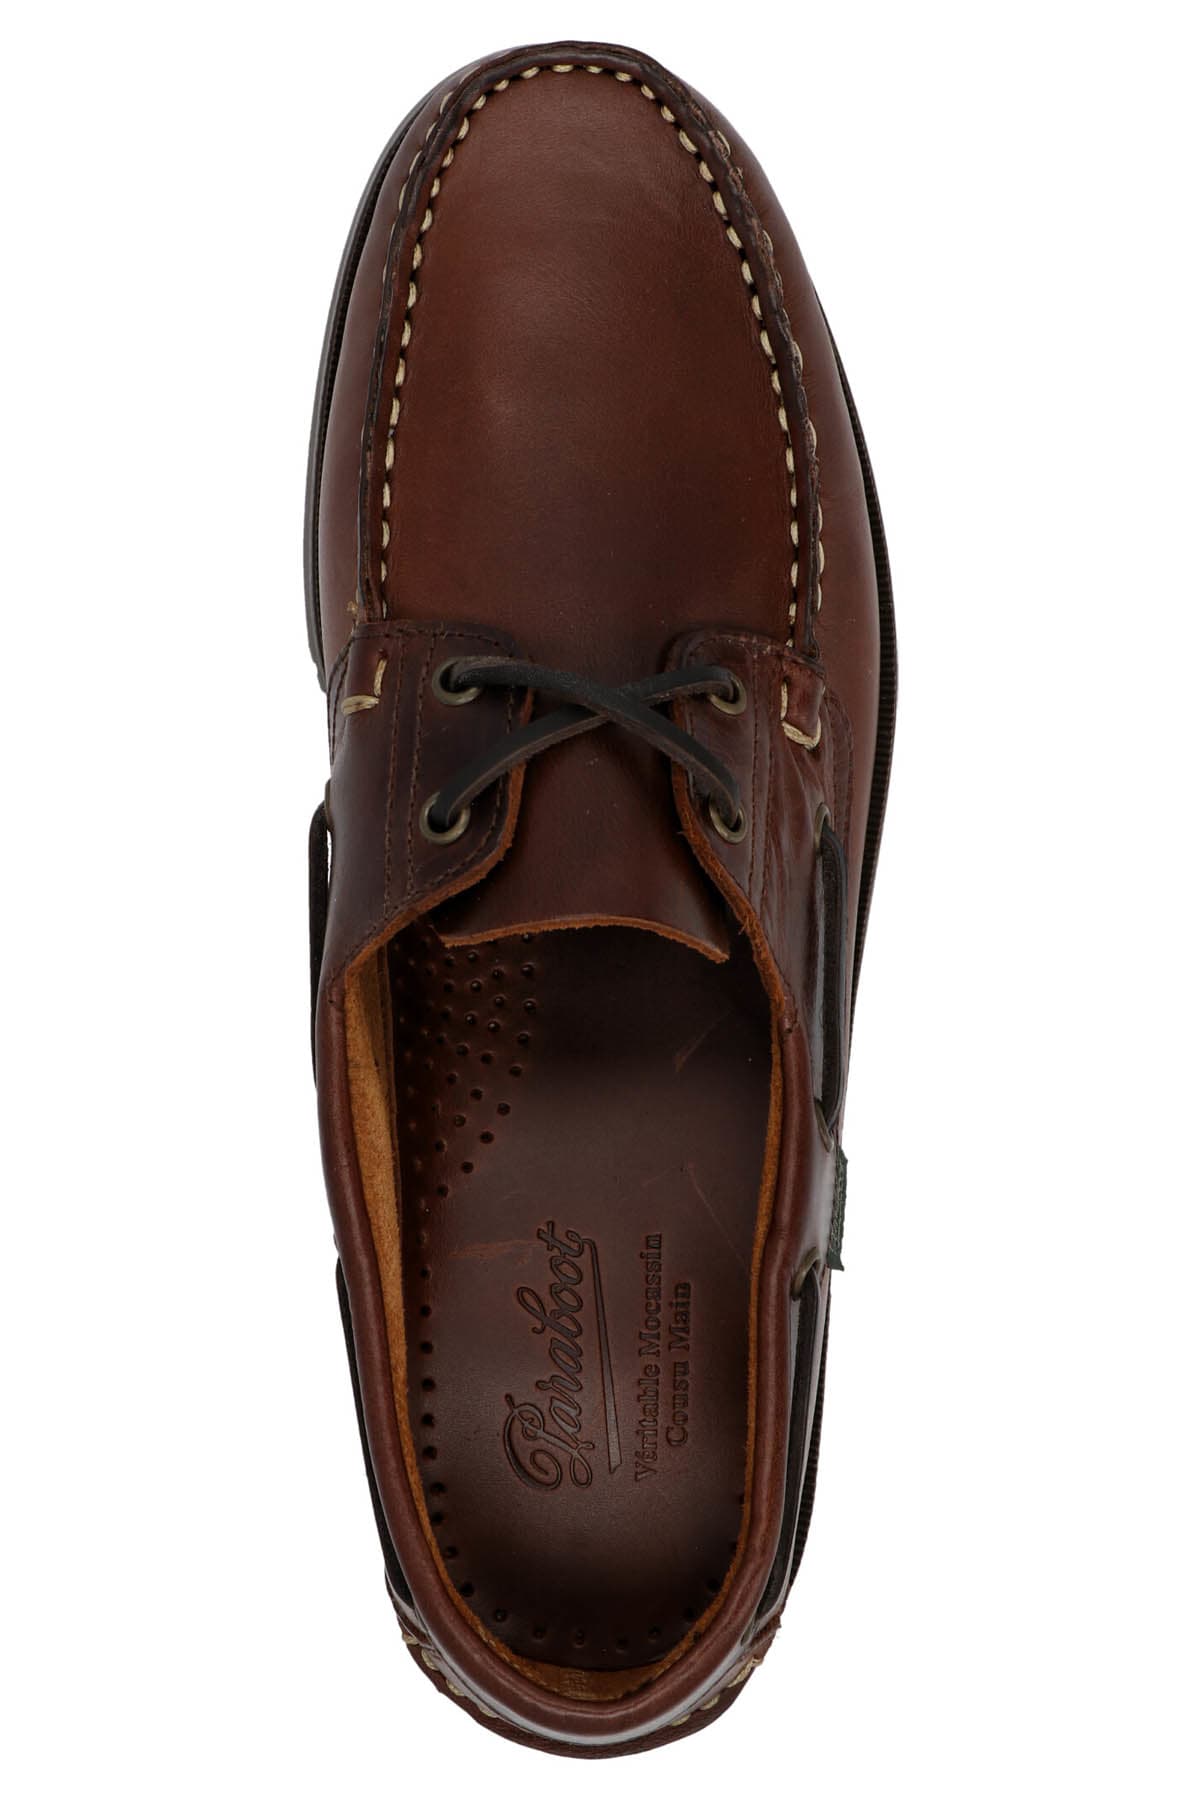 barth Boat Shoes